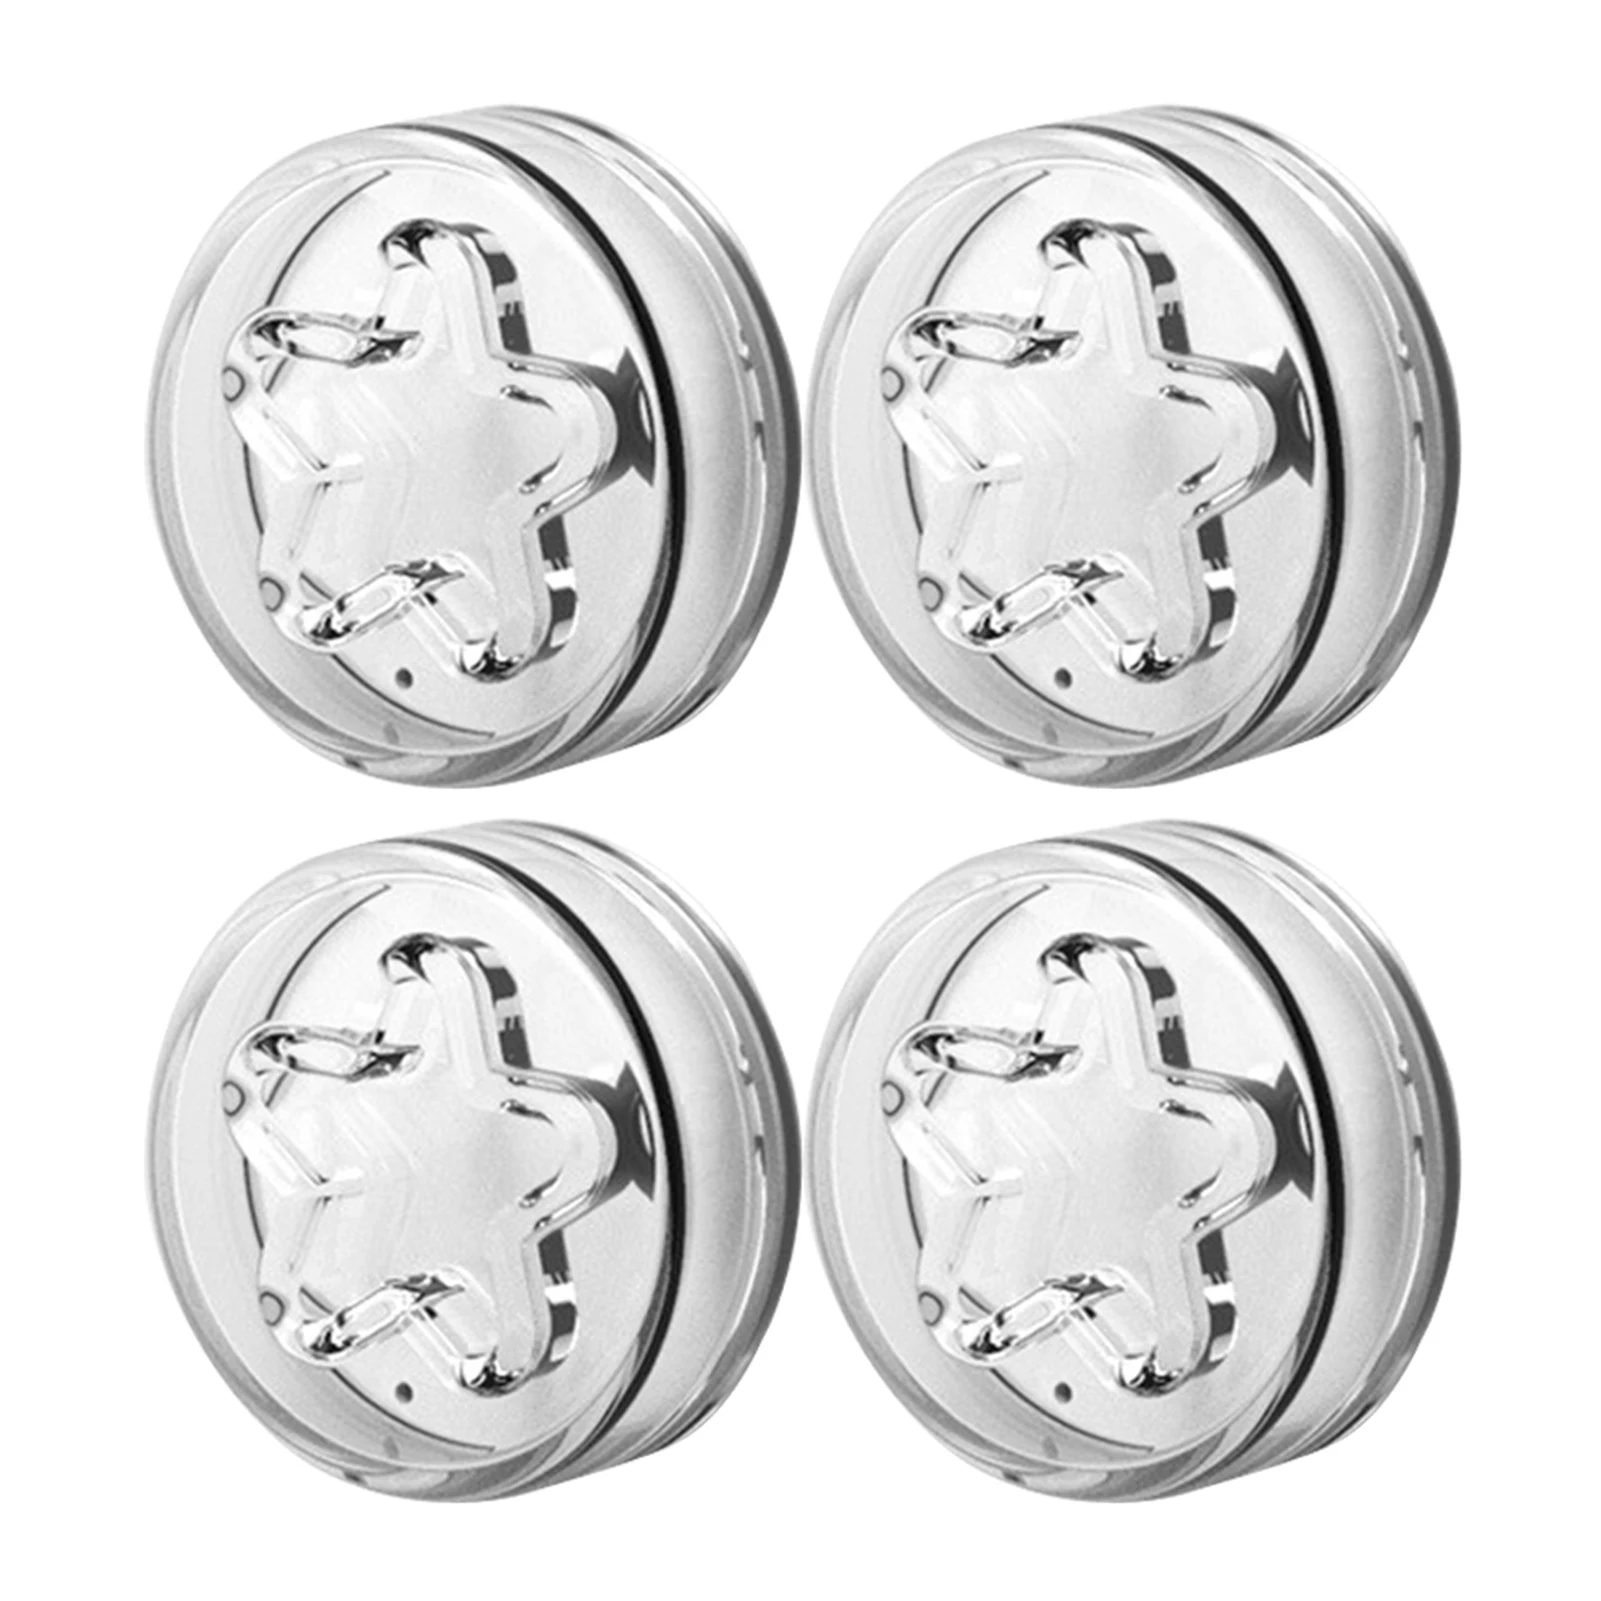 

4pcs/pack Knobs Shield Guard Baby Safety Self Adhesive Door Handle Cushion Wall Protector Stopper Anti Collision Clear Bumpers